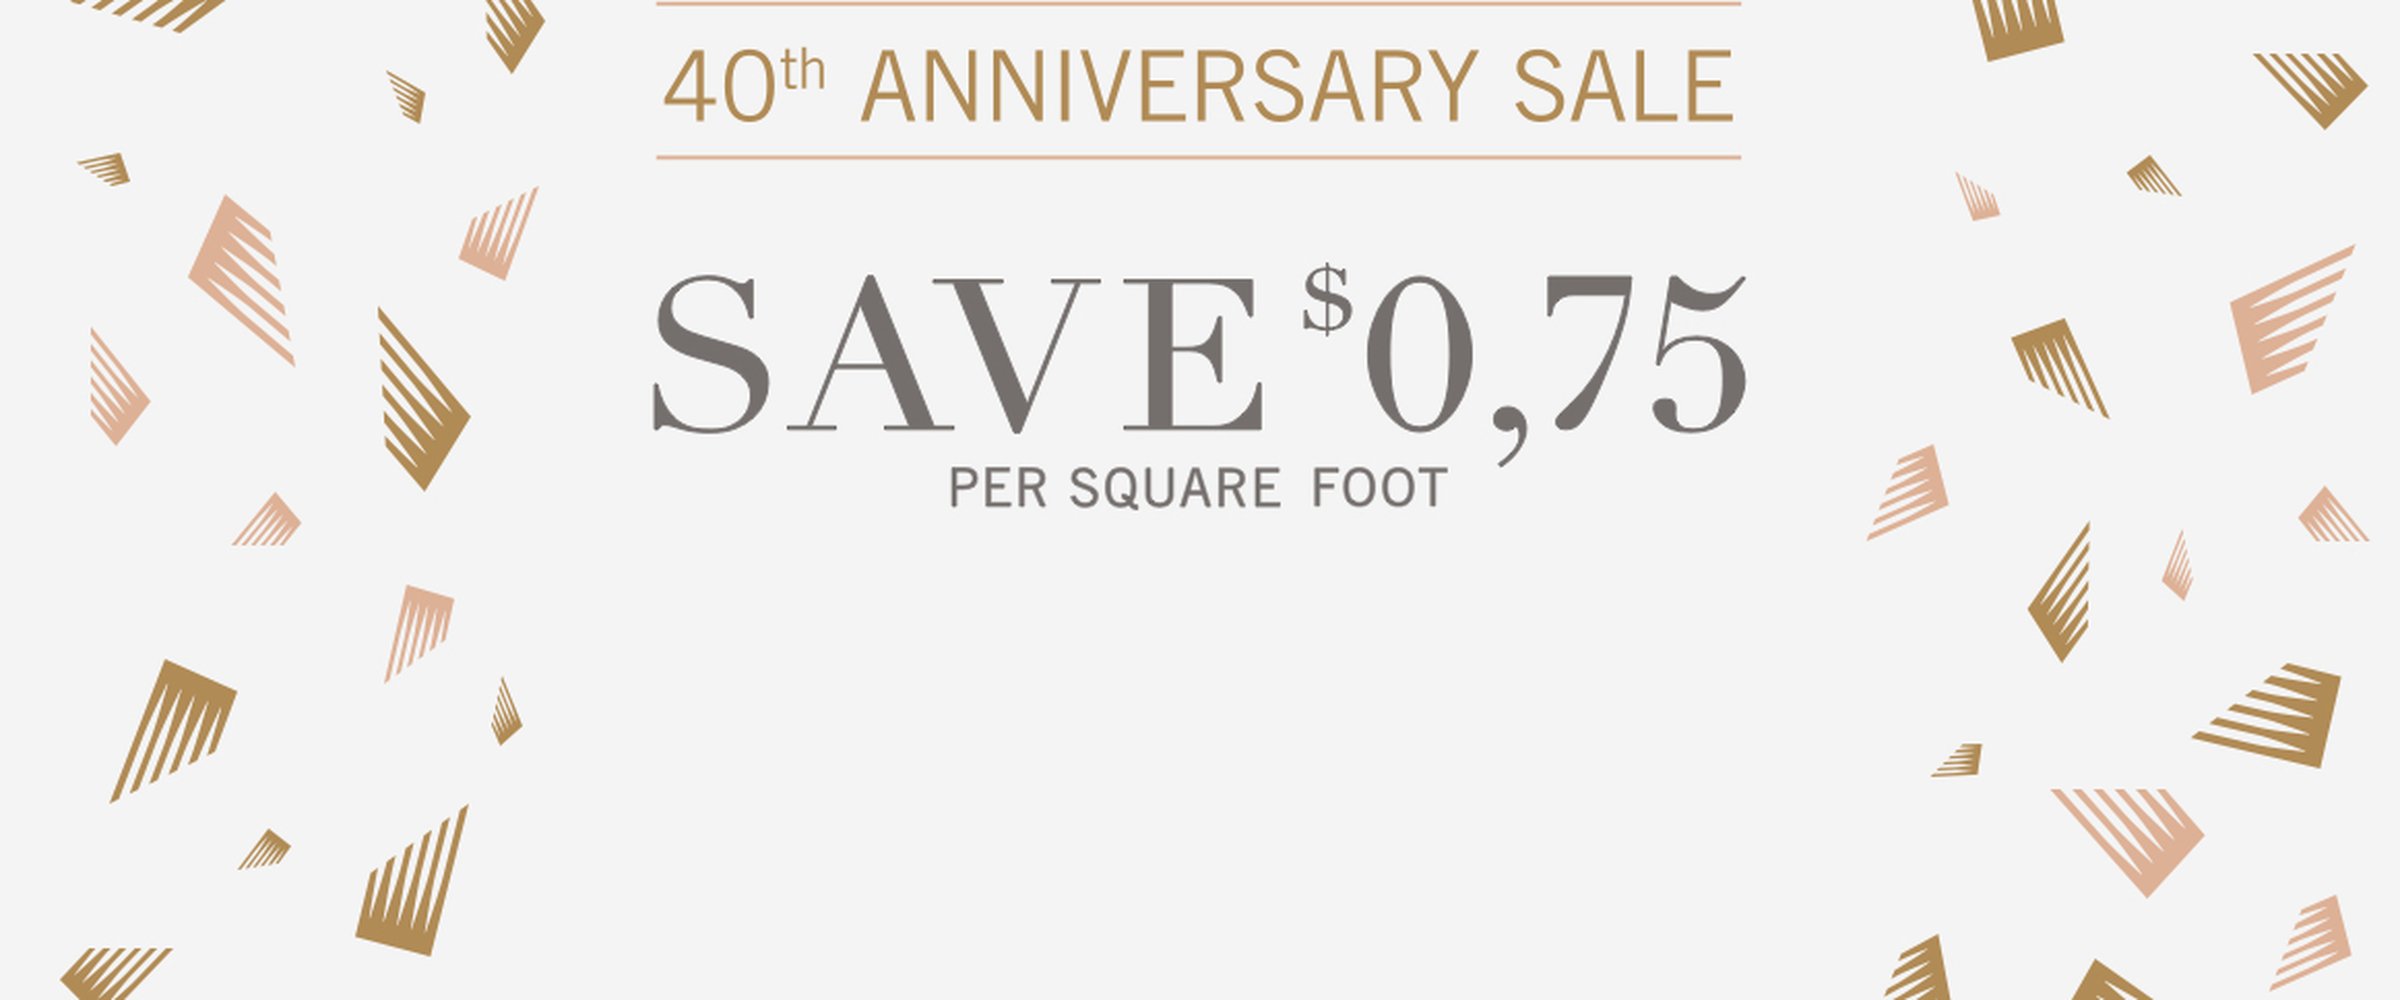 Mercier Wood Flooring celebrates its 40<sup>th</sup> anniversary with an exclusive promotion